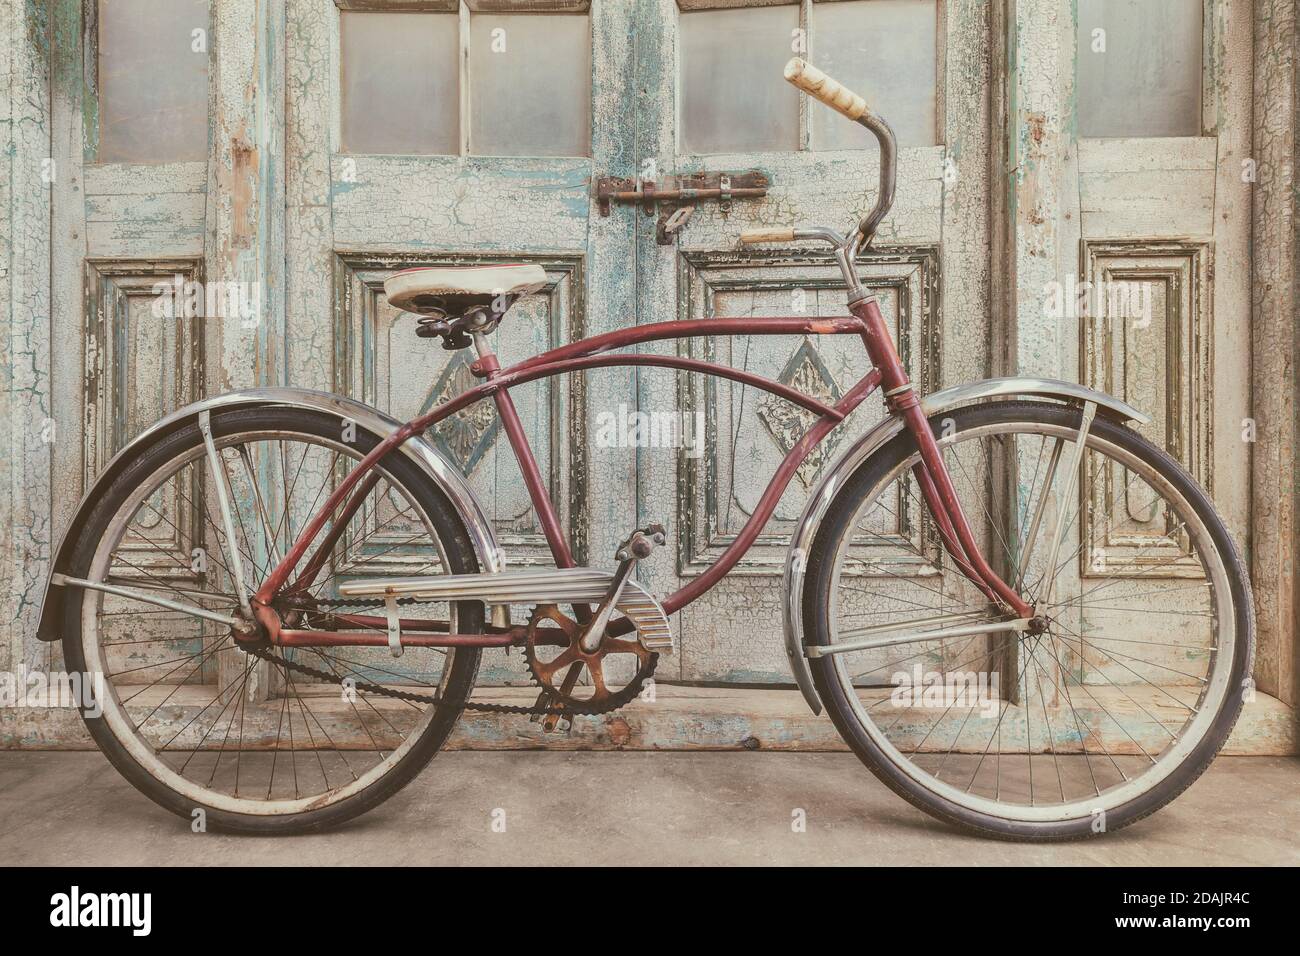 Vintage beach cruiser bicycle in front of antique wooden weathered doors  Stock Photo - Alamy